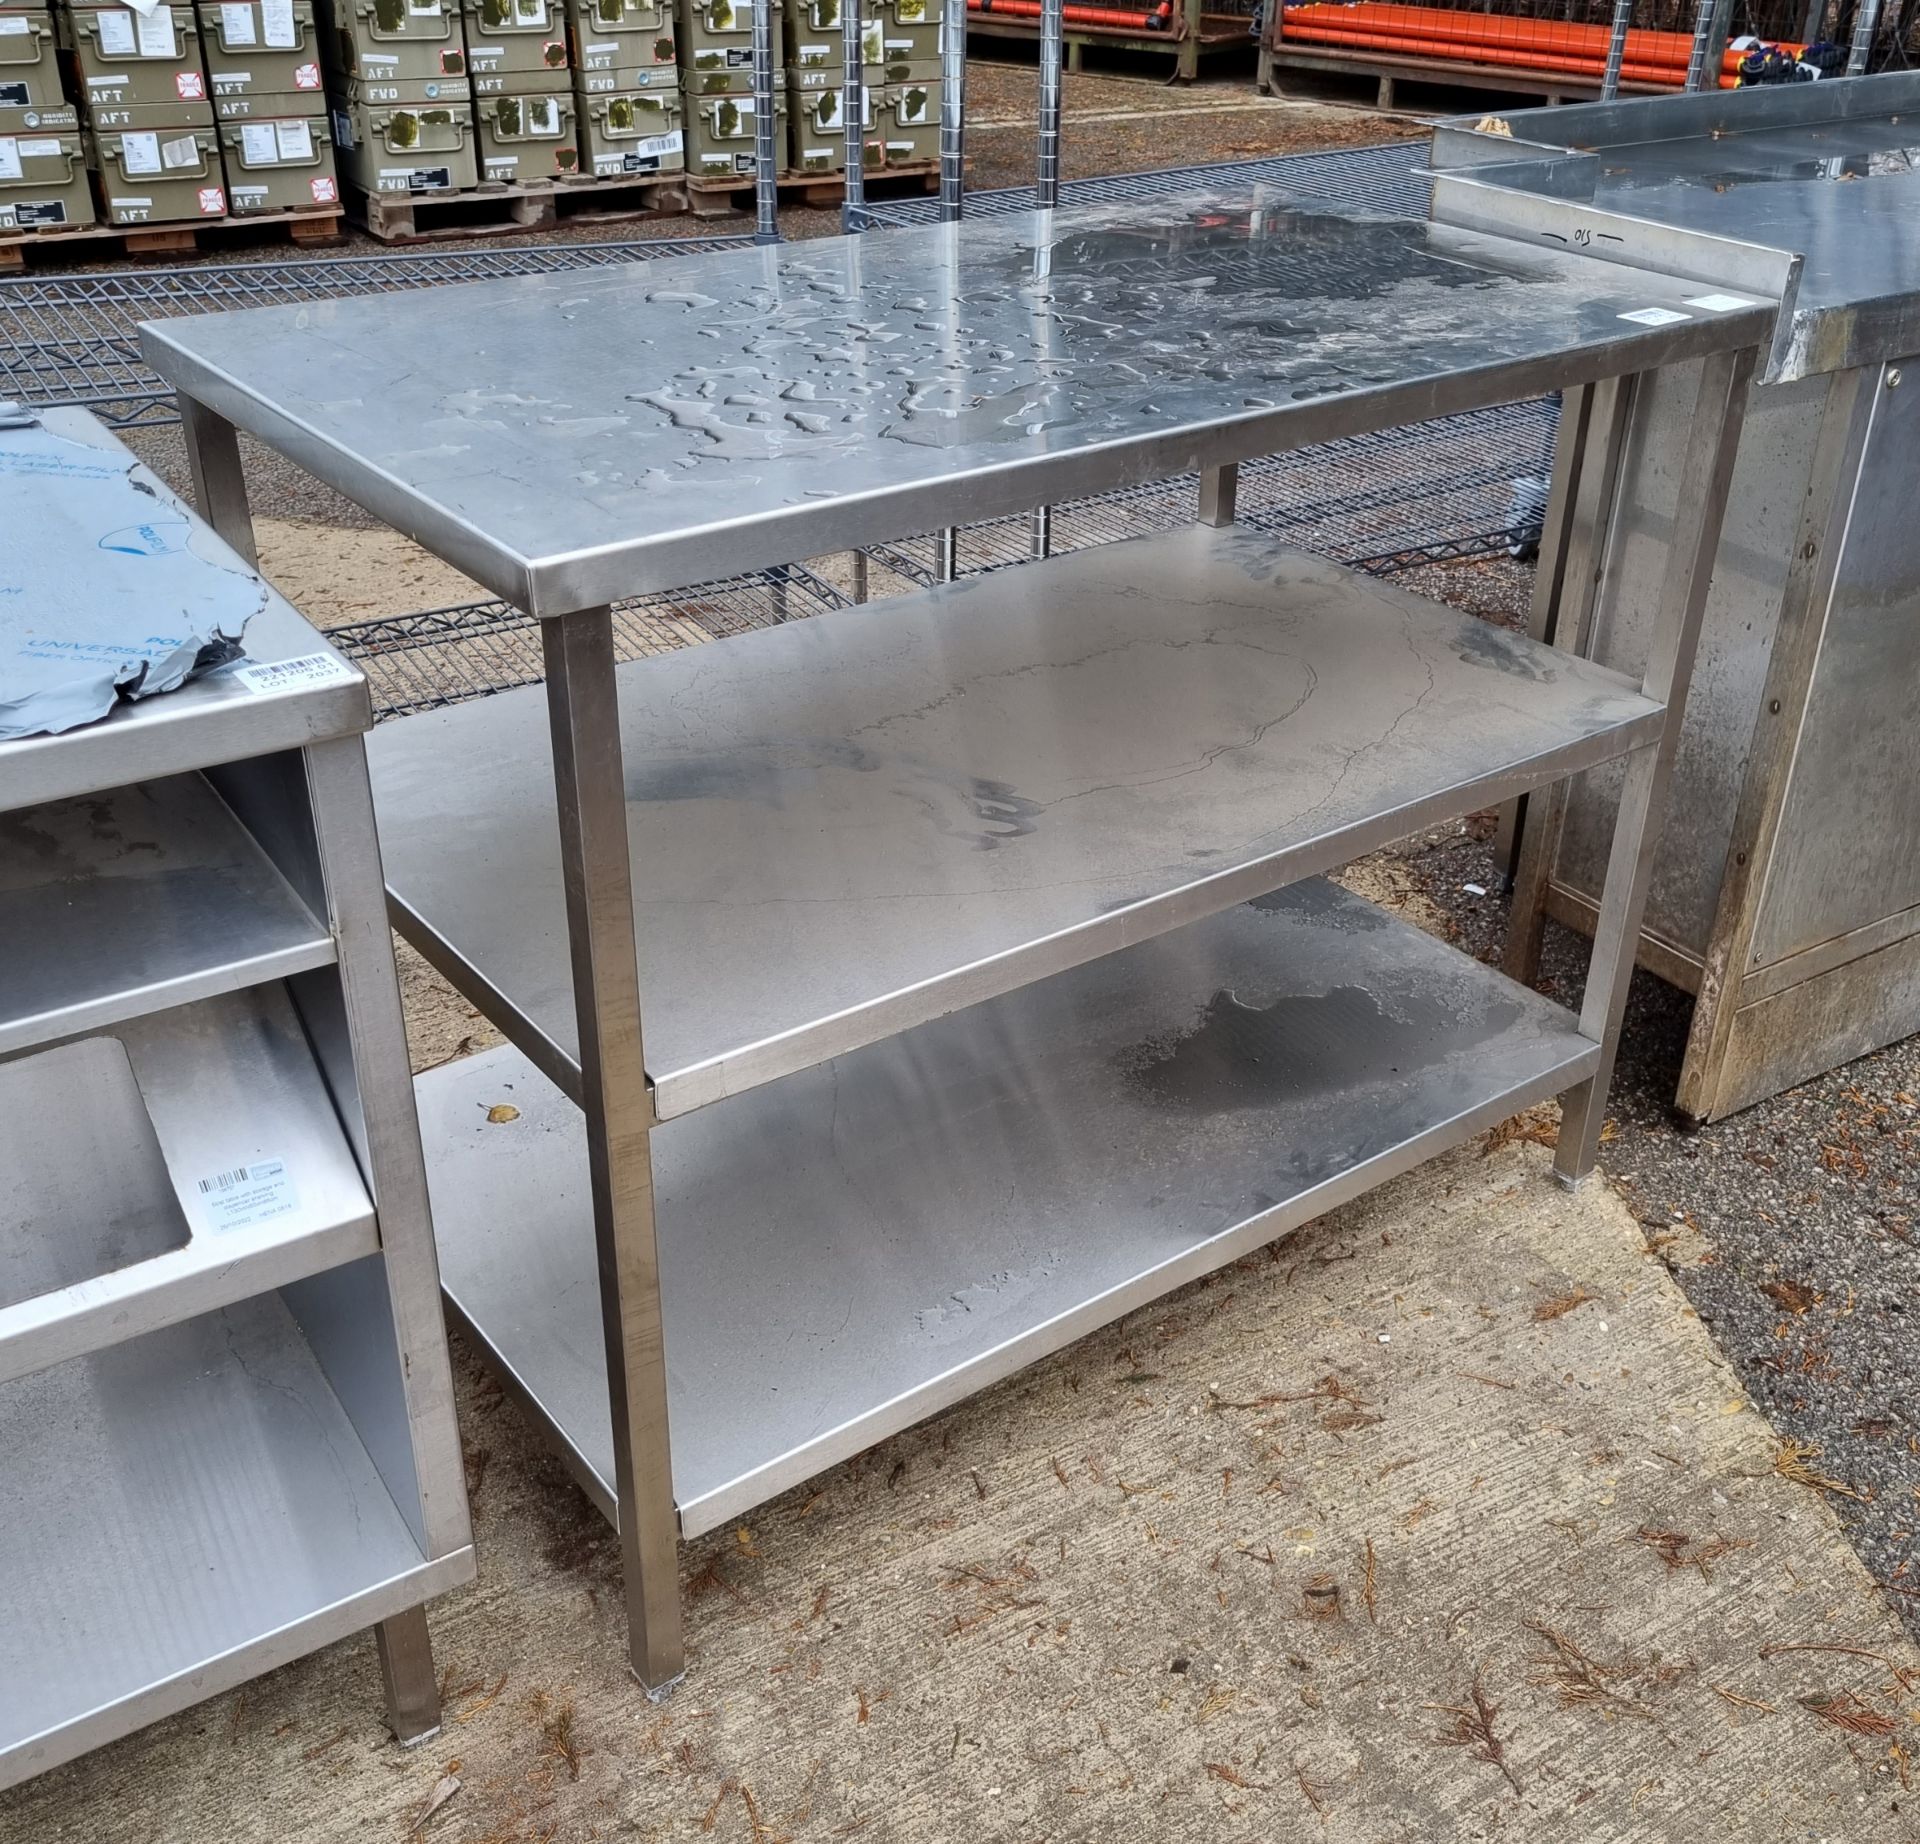 Stainless Steel 3-tier prep table - L 115 x W 64 x H 92cm - Image 2 of 2